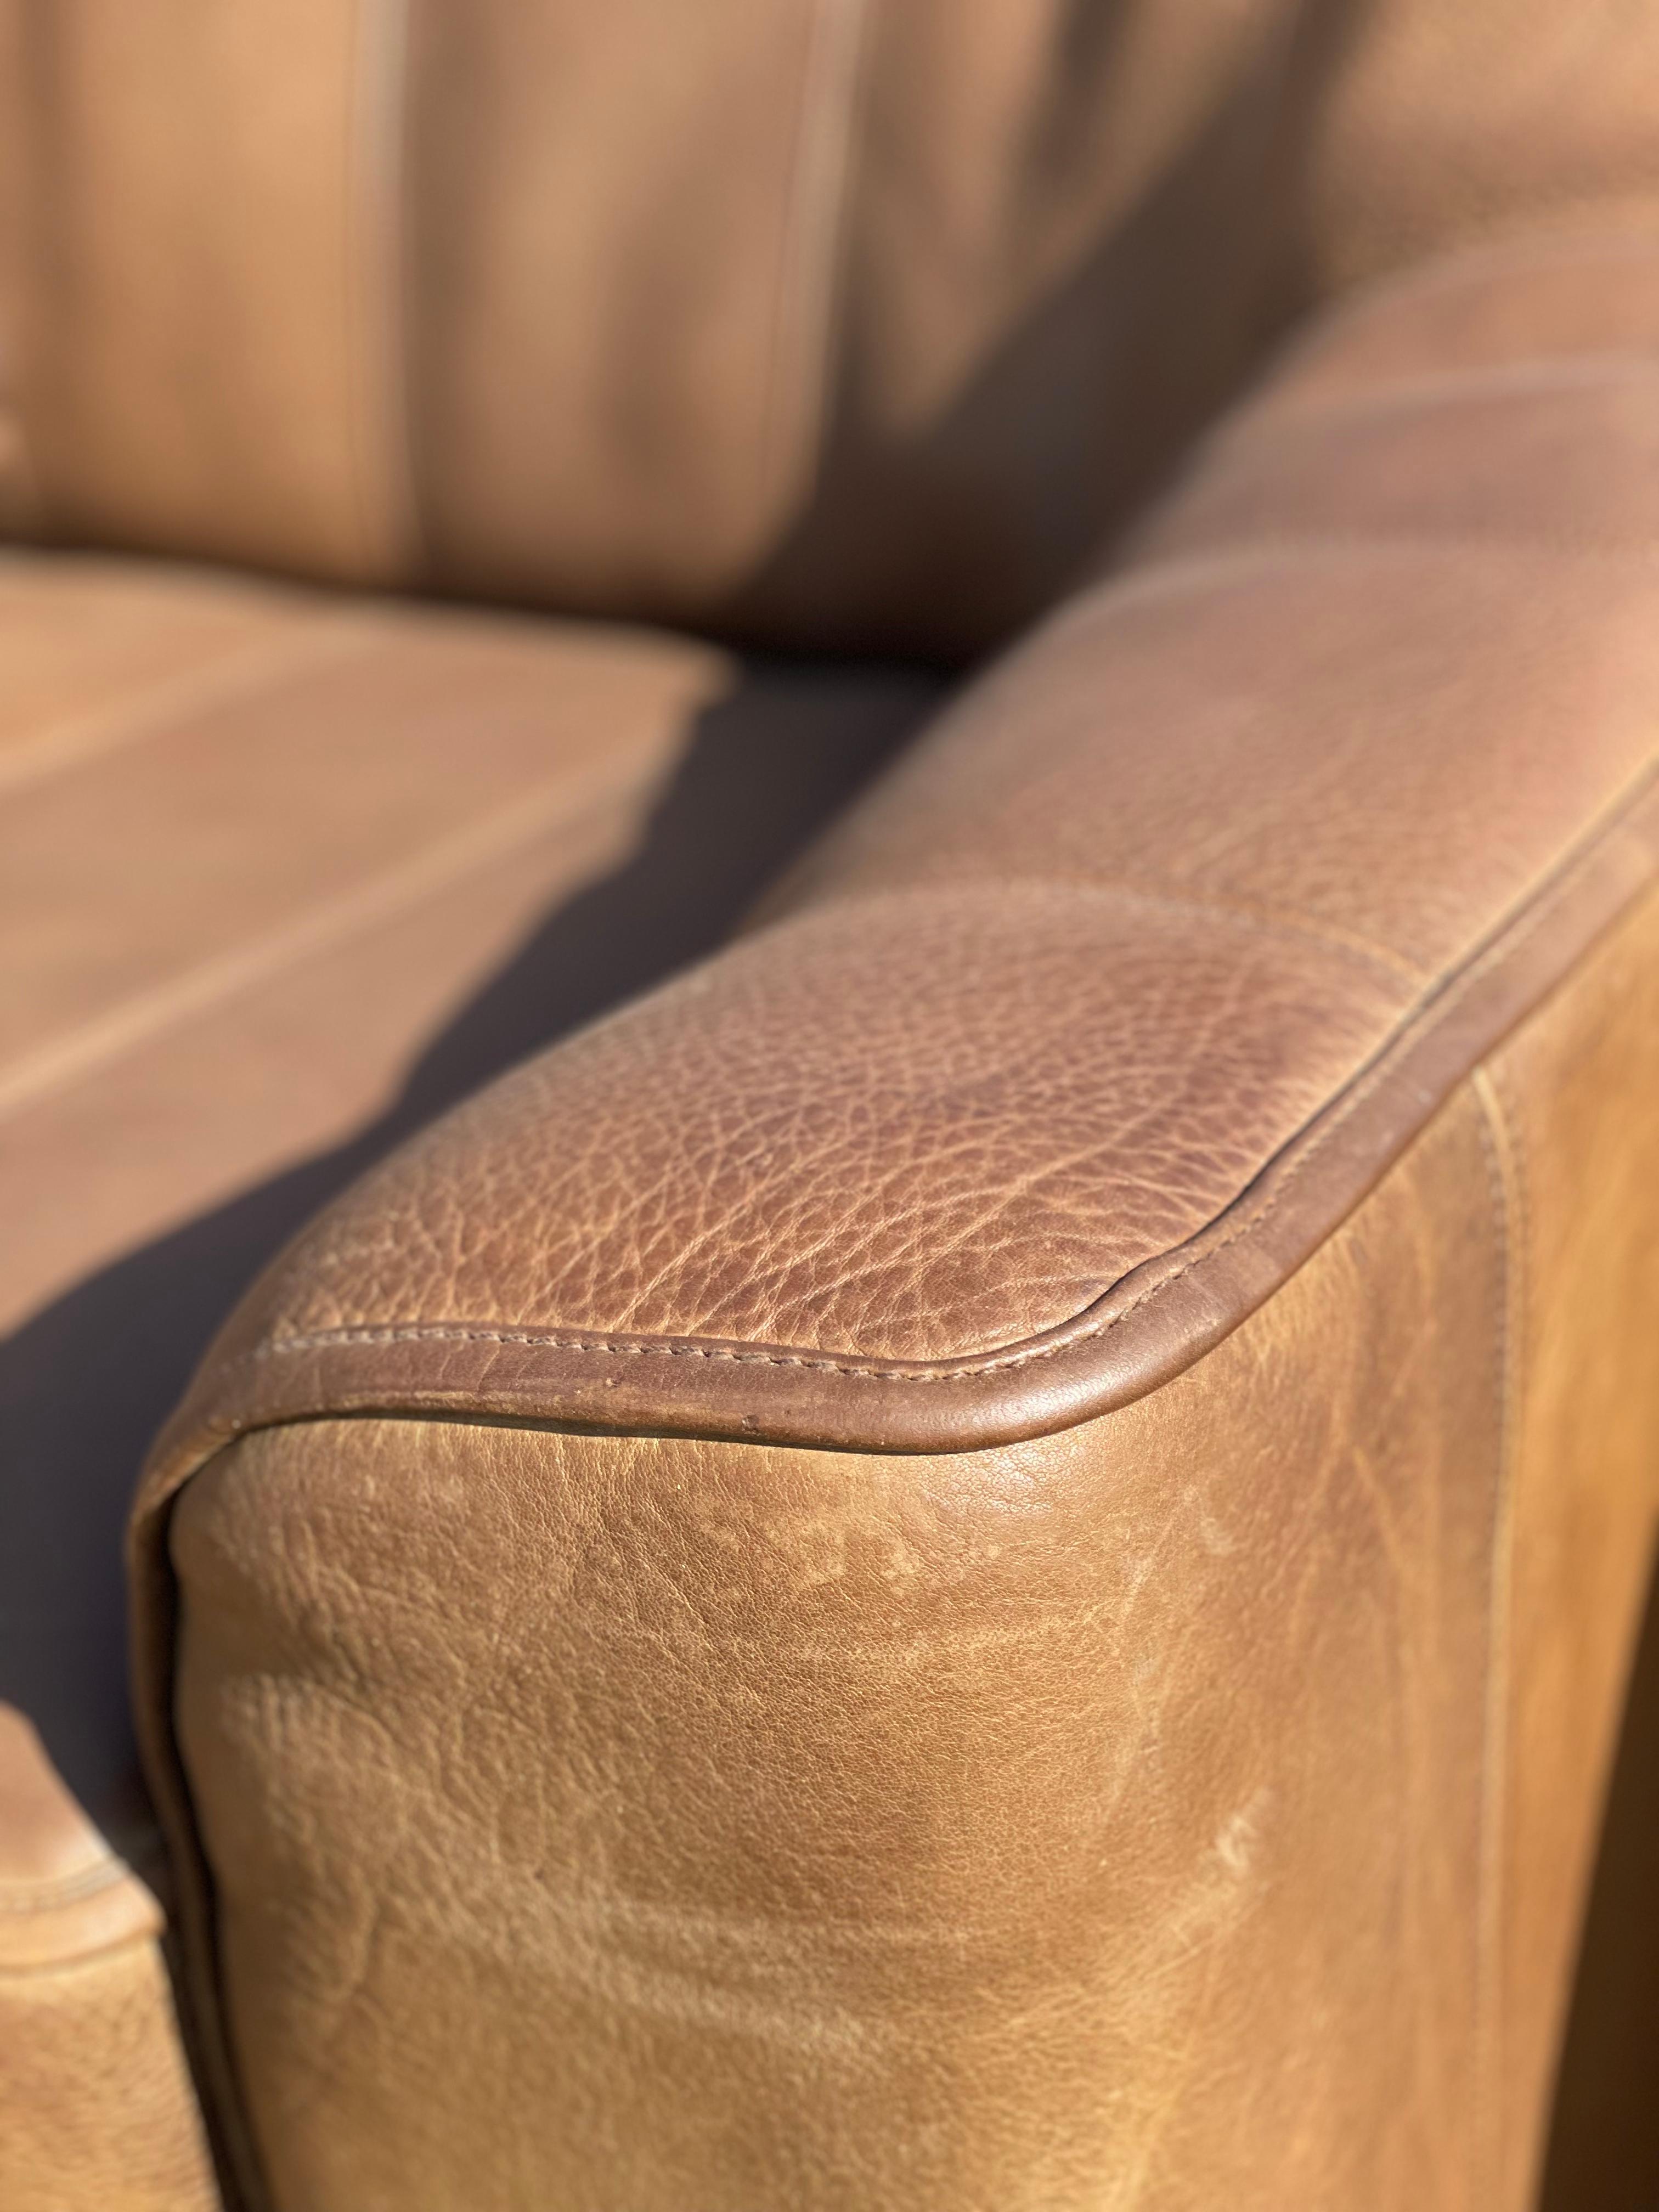 The DS 44 2 seat comfort leather block style sofa is designed and produced by De Sede in Switzerland. This beautiful 2 seat sofa is in a patina chocolate brown buffalo leather that features vertical stitching on the seat and seat back. The leather